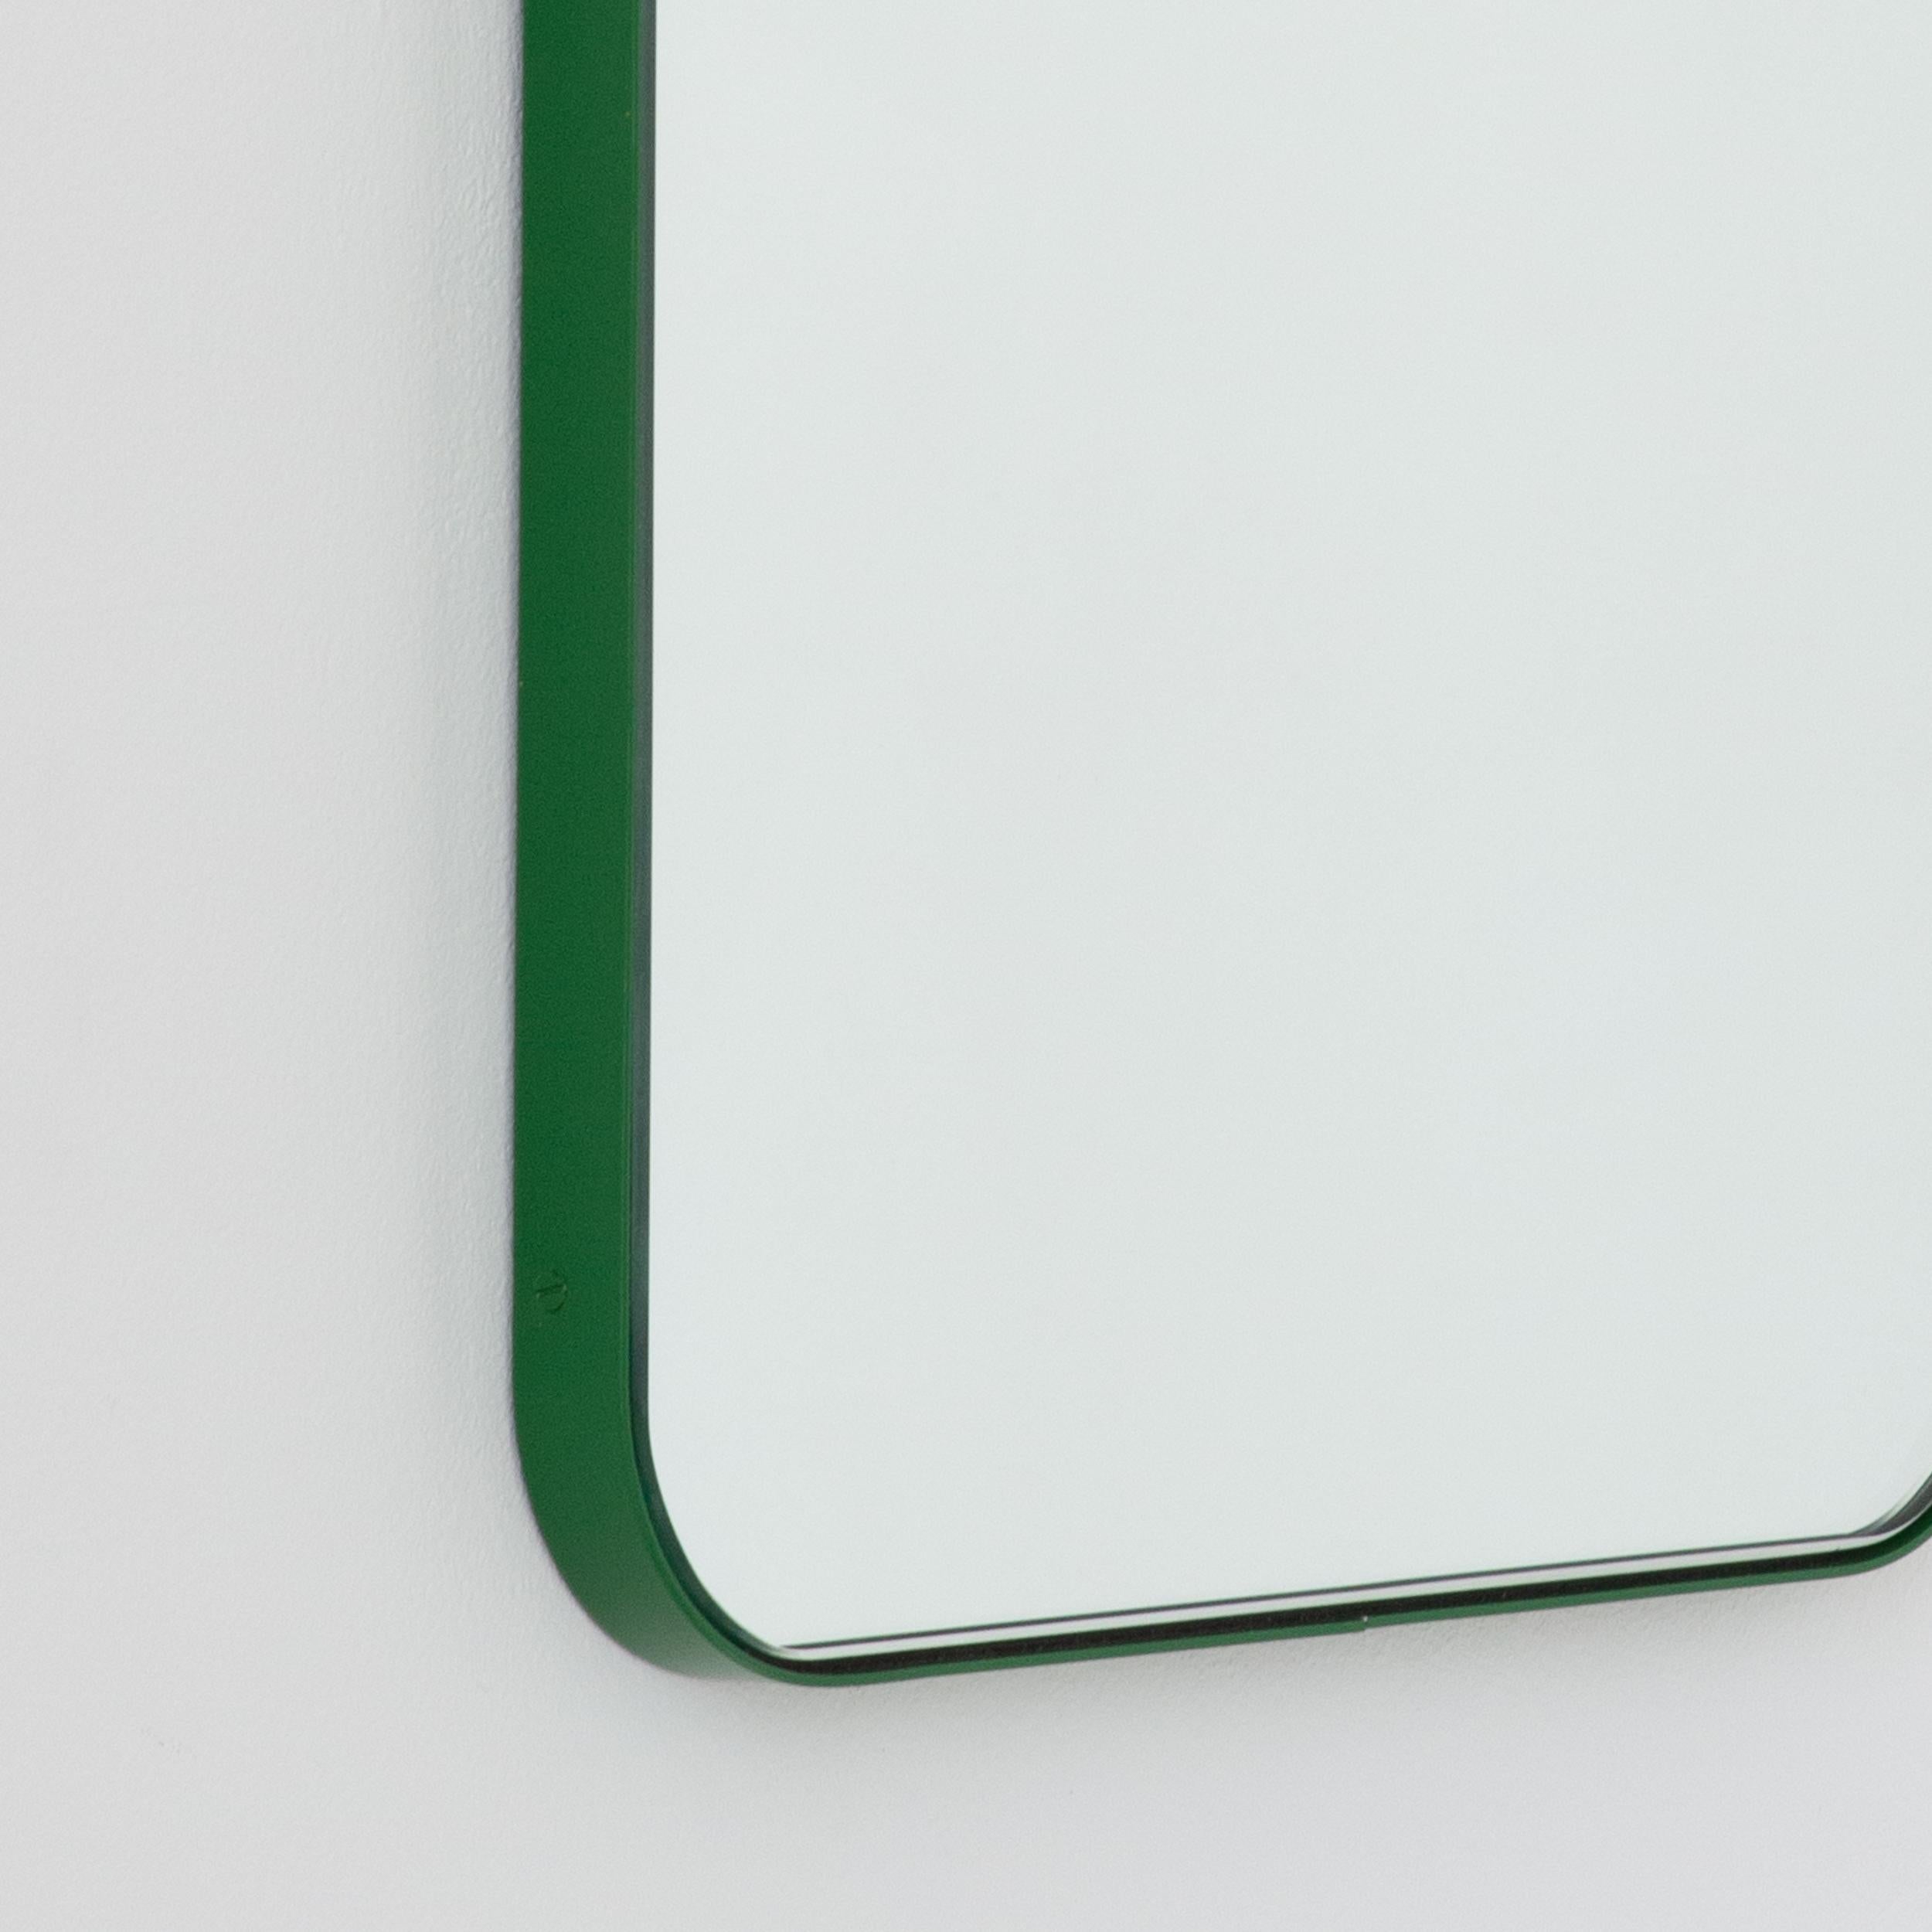 Quadris Rectangular Minimalist Mirror with a Modern Green Frame, Medium In New Condition For Sale In London, GB